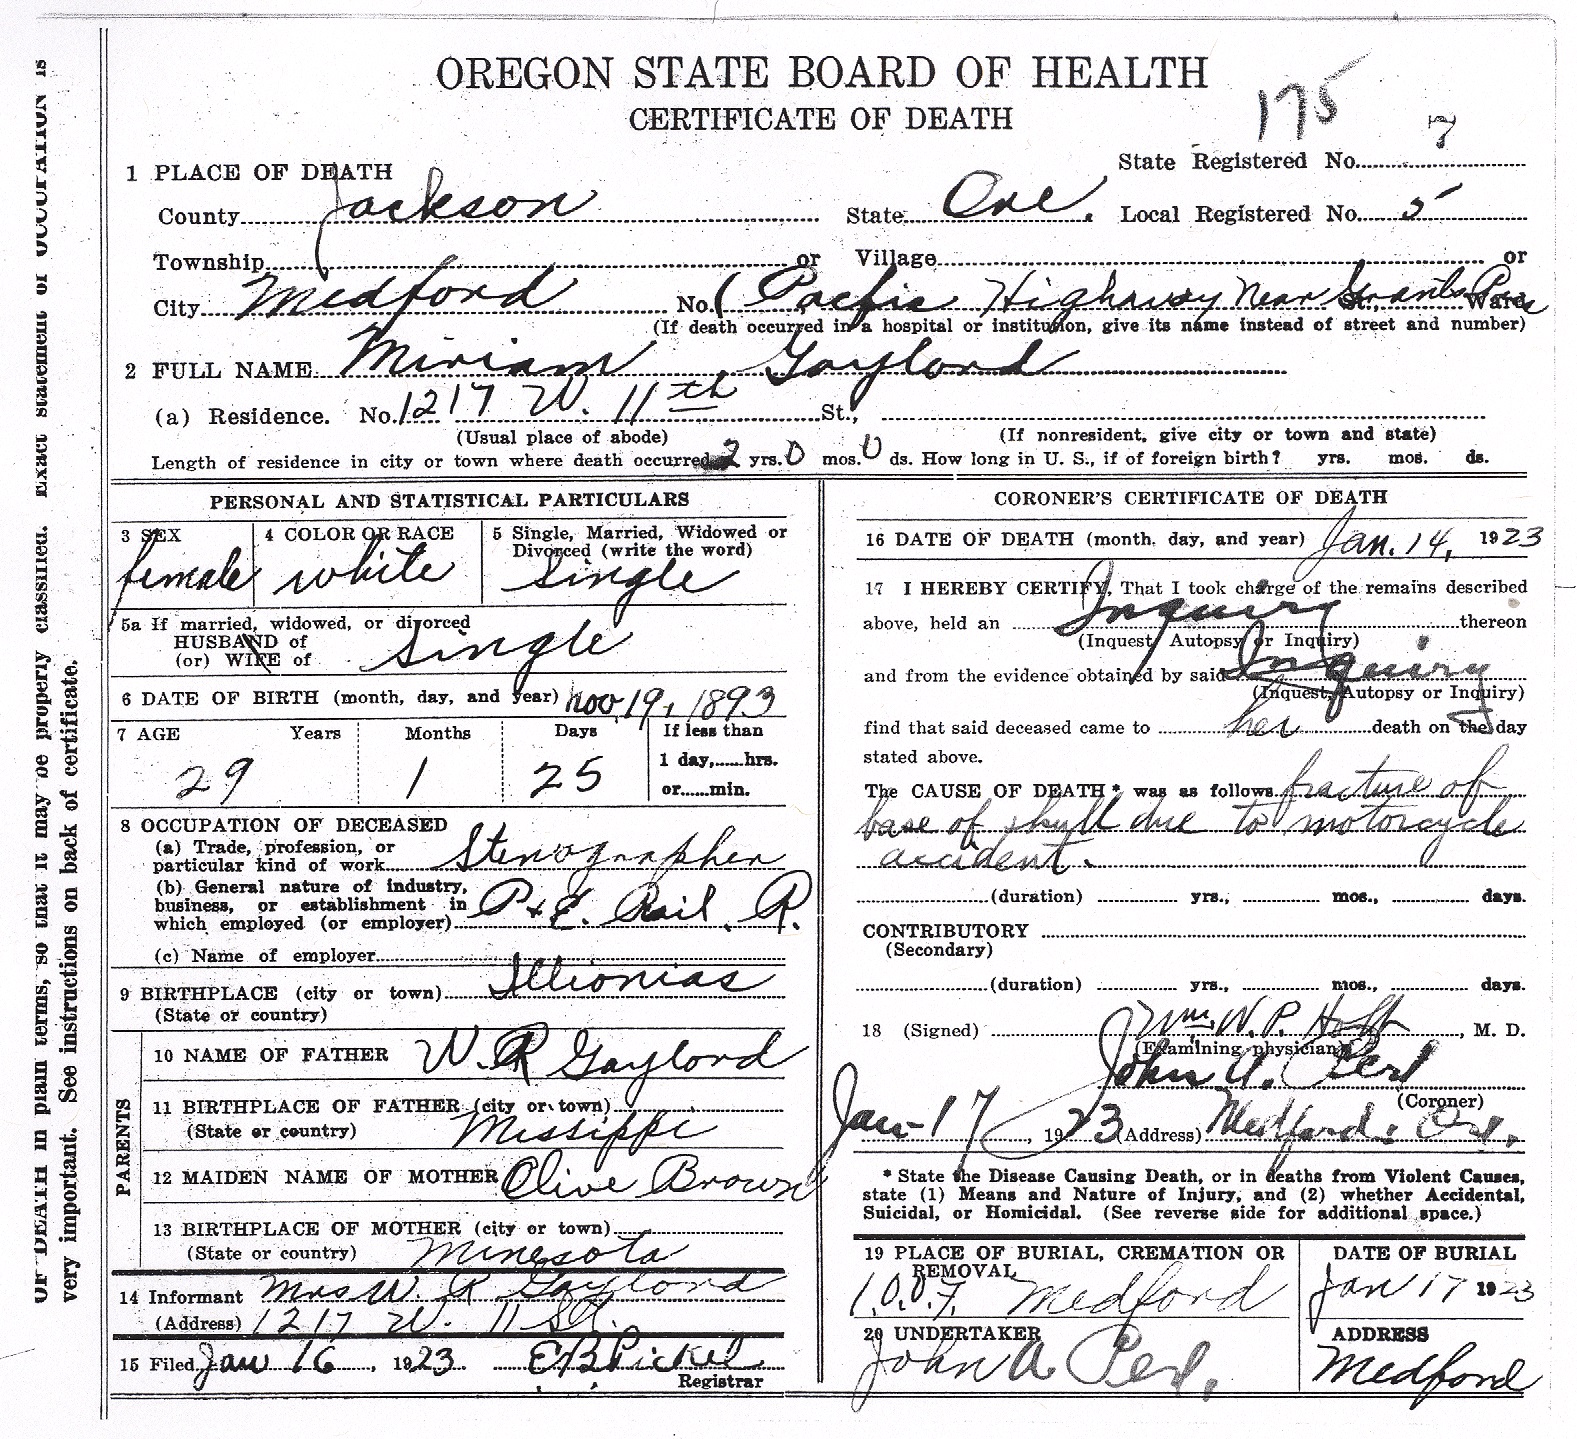 Miriam Gaylord death certificate, January 14, 1923